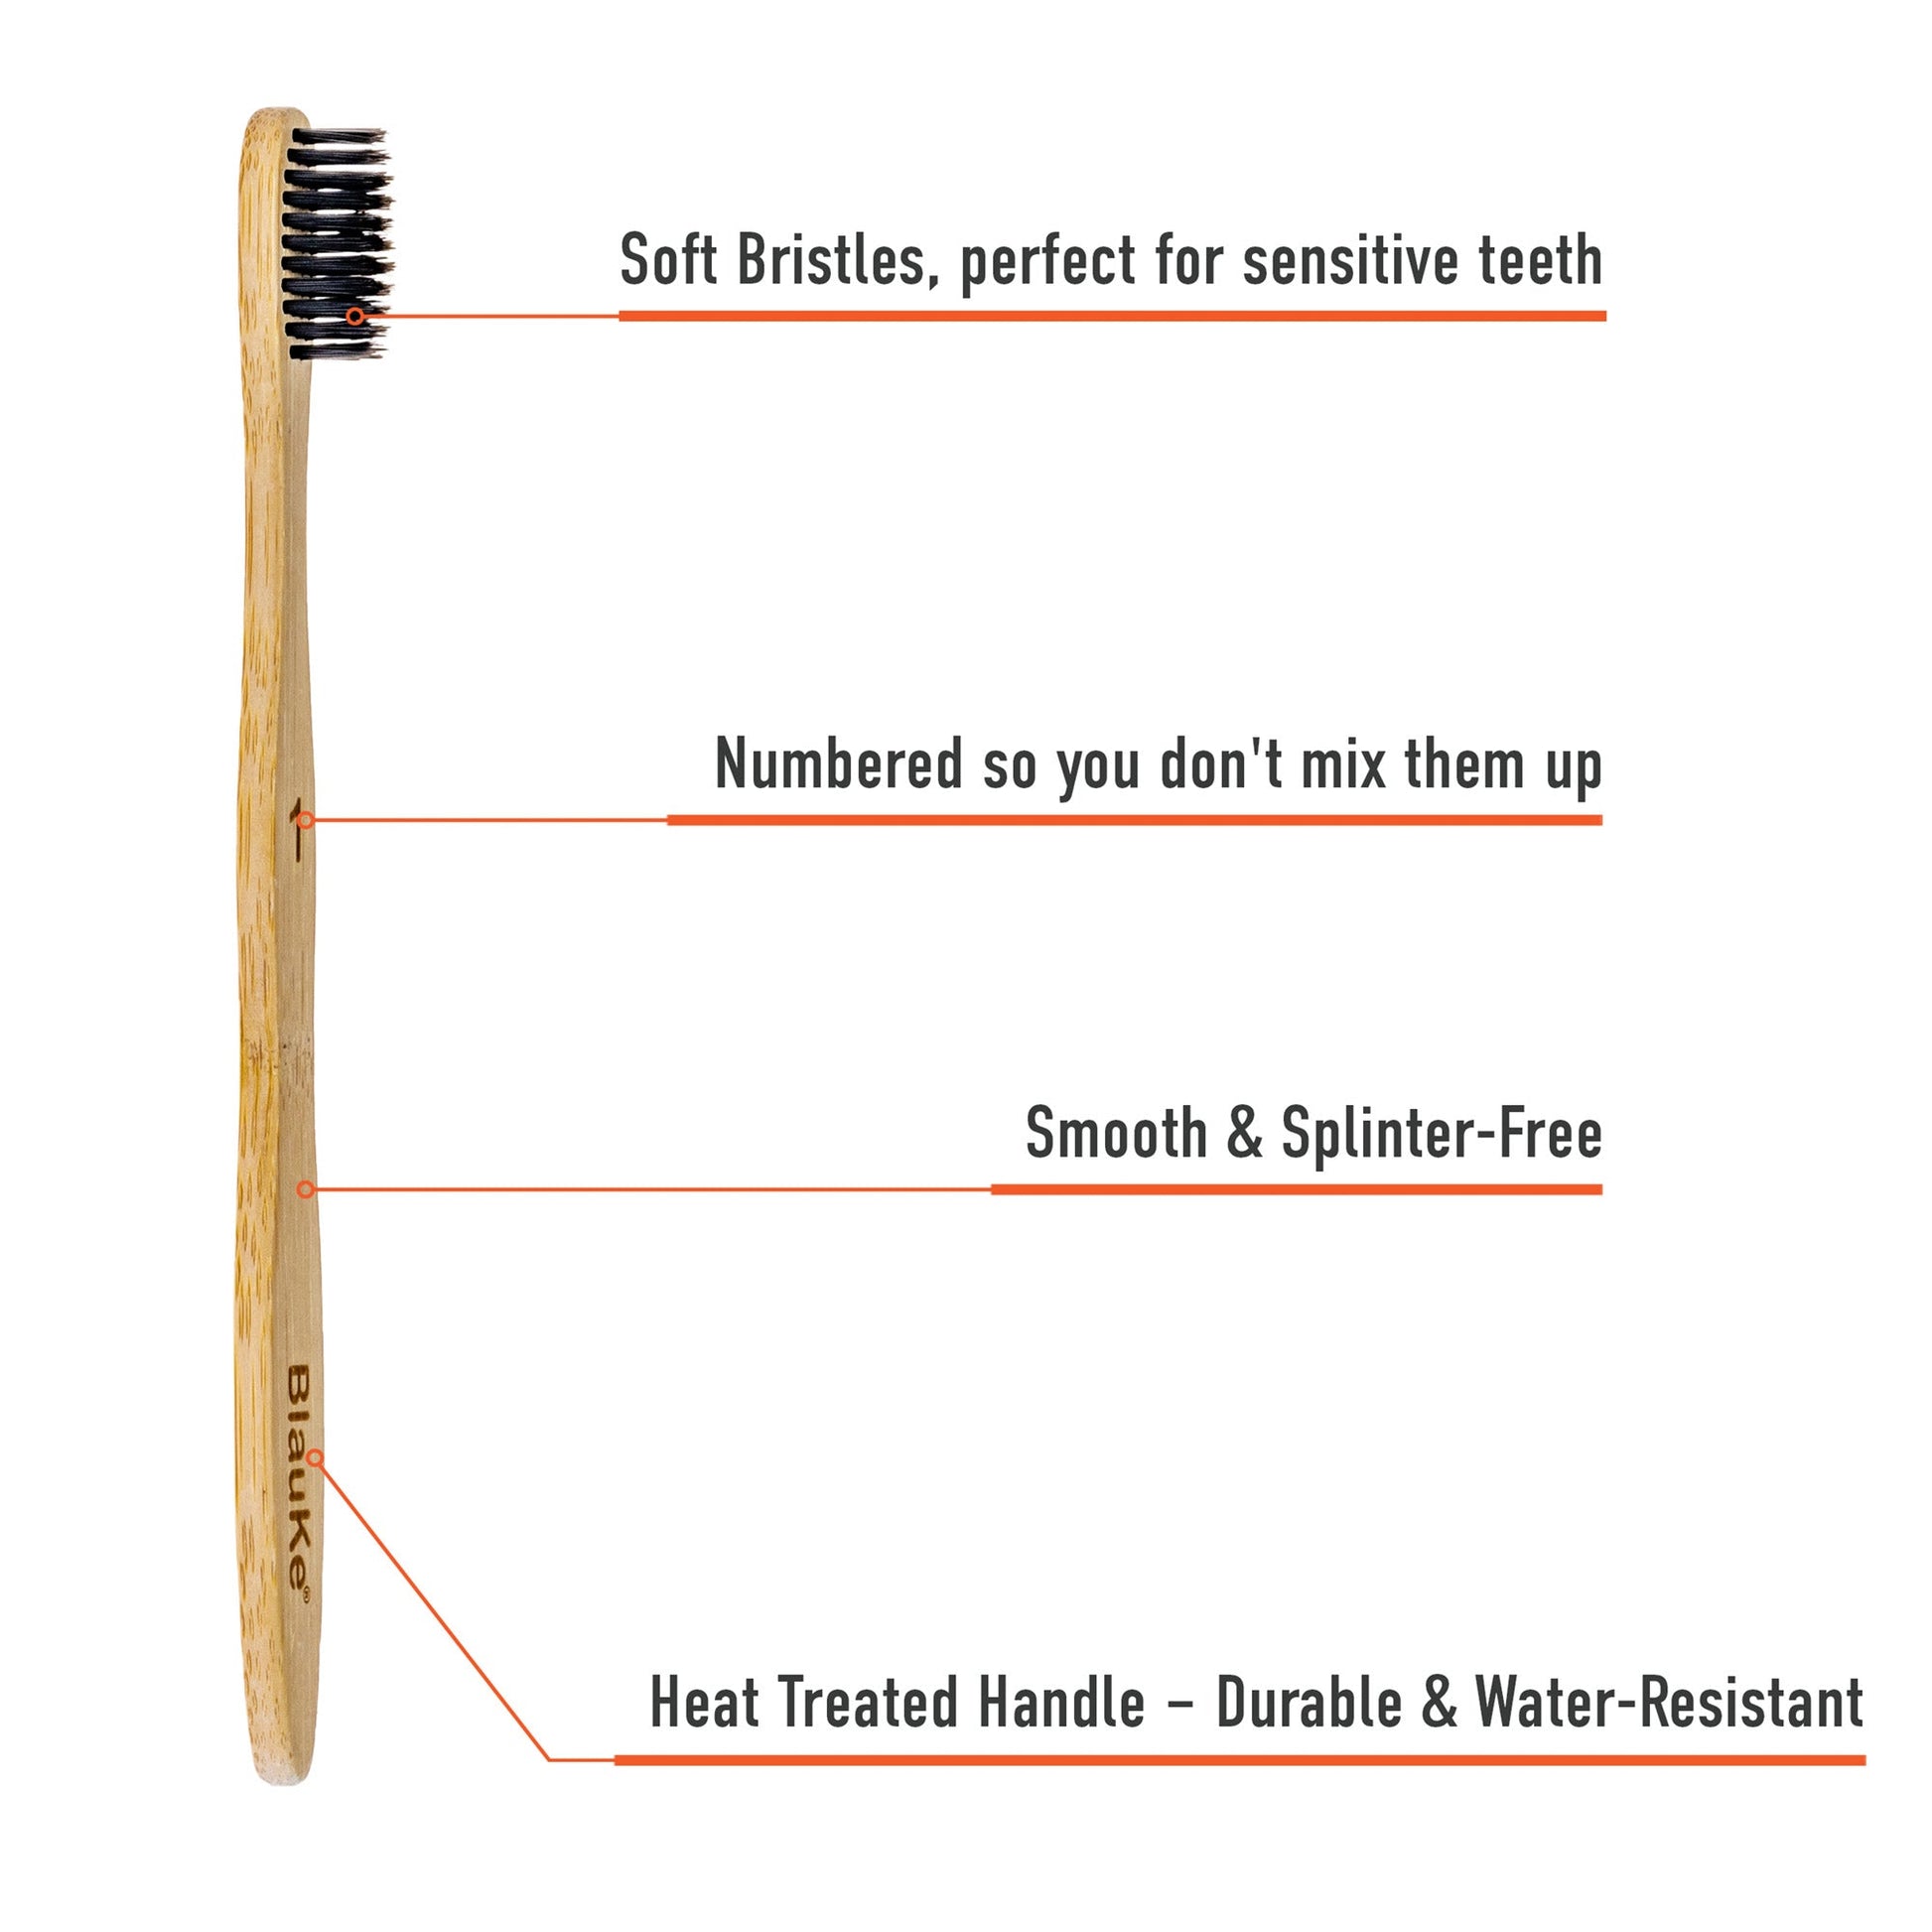 Bamboo Toothbrush Set 4-Pack - Bamboo Toothbrushes with Soft Bristles for Adults - Eco-Friendly, Biodegradable, Natural Wooden Toothbrushes-8